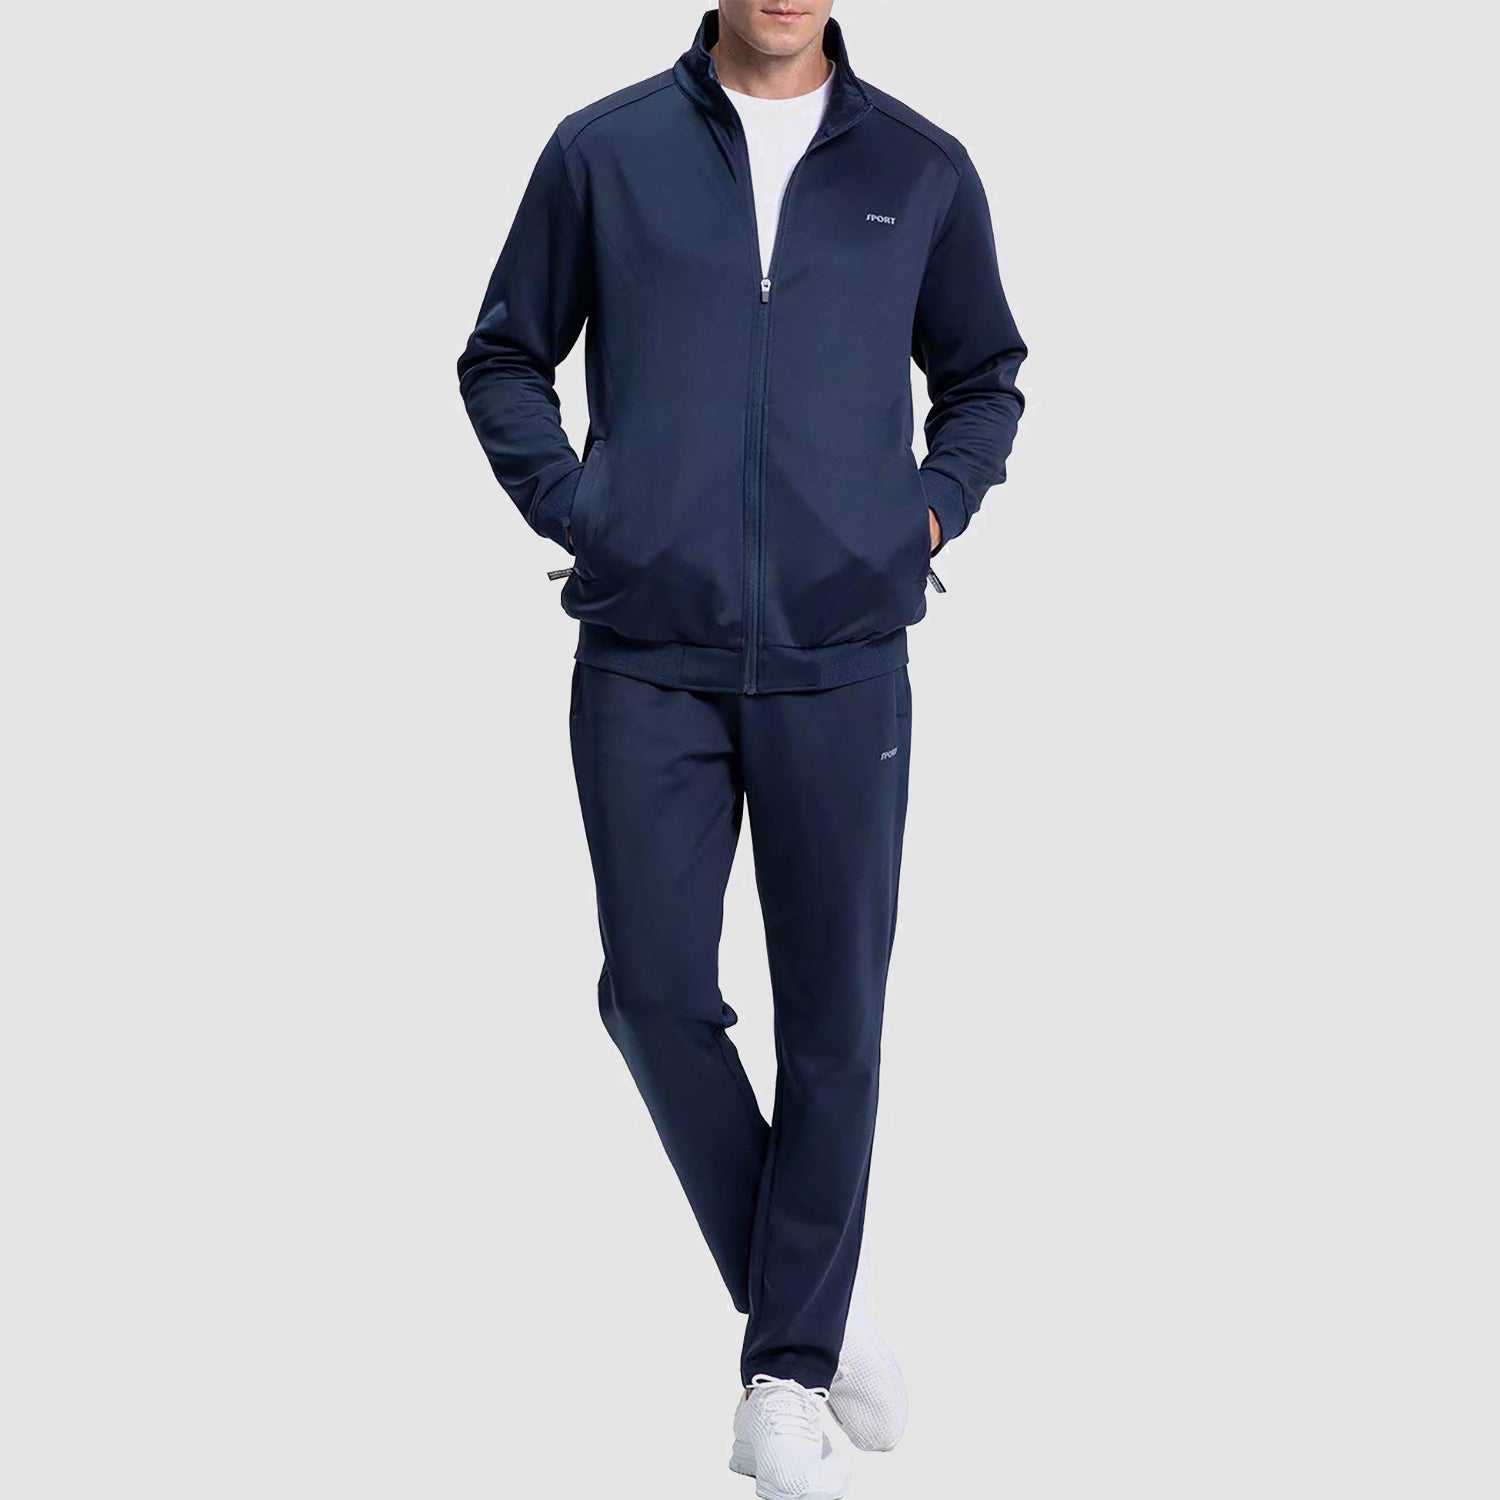 Mens Athletic Sweatsuit 2 Piece Tracksuit Casual Workout Jogging Sets Full Zip